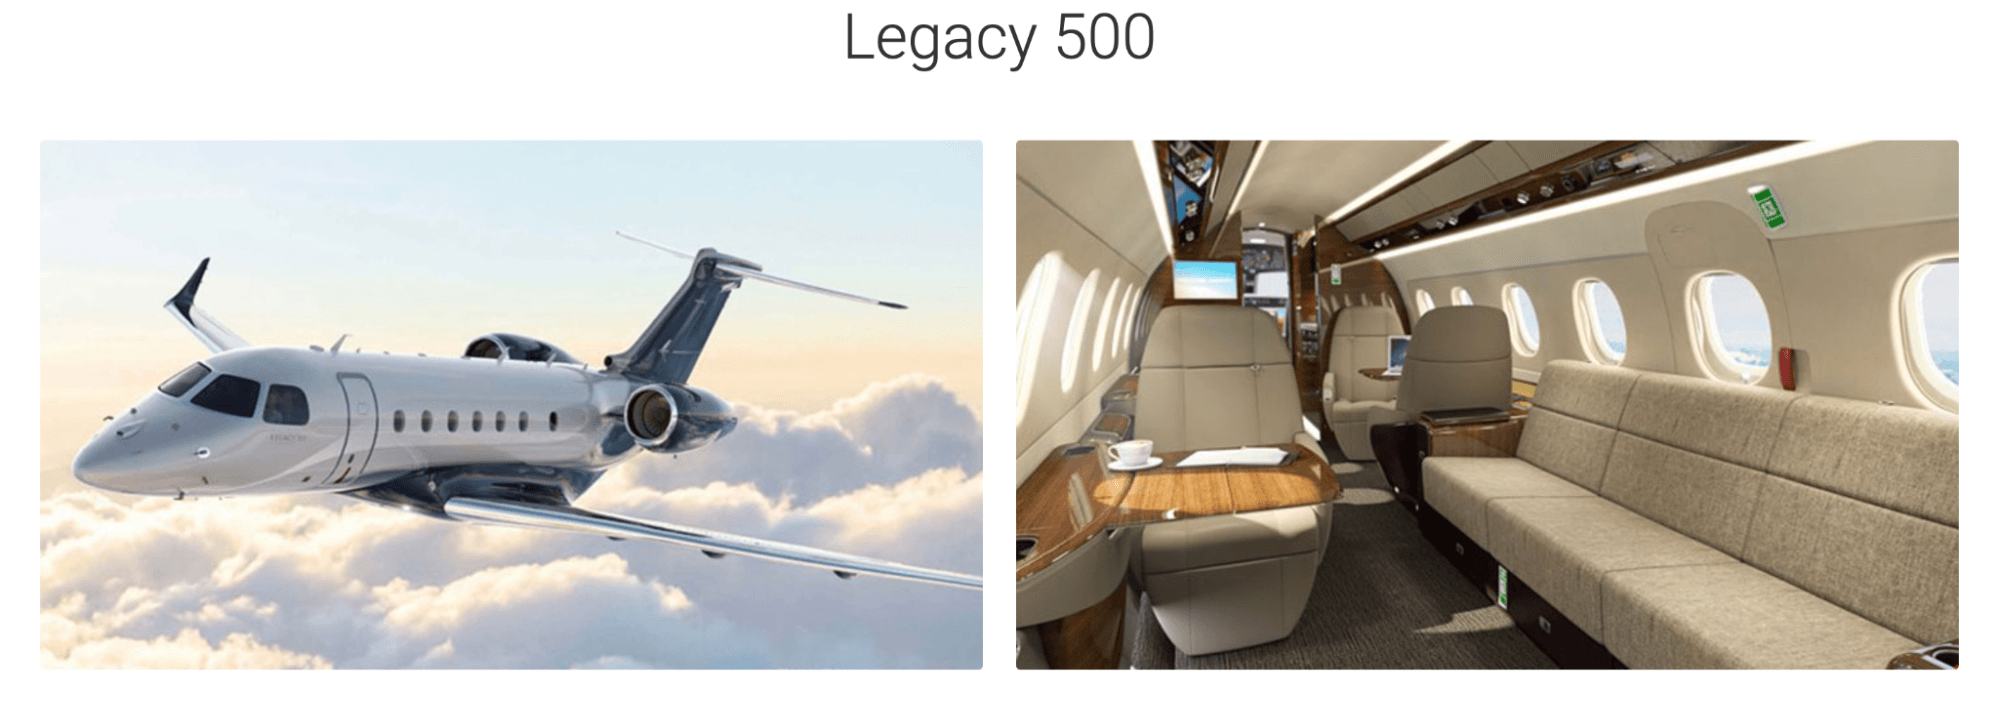 The picture shows the interior and exterior of Legacy 500 jets available from JetOptions.